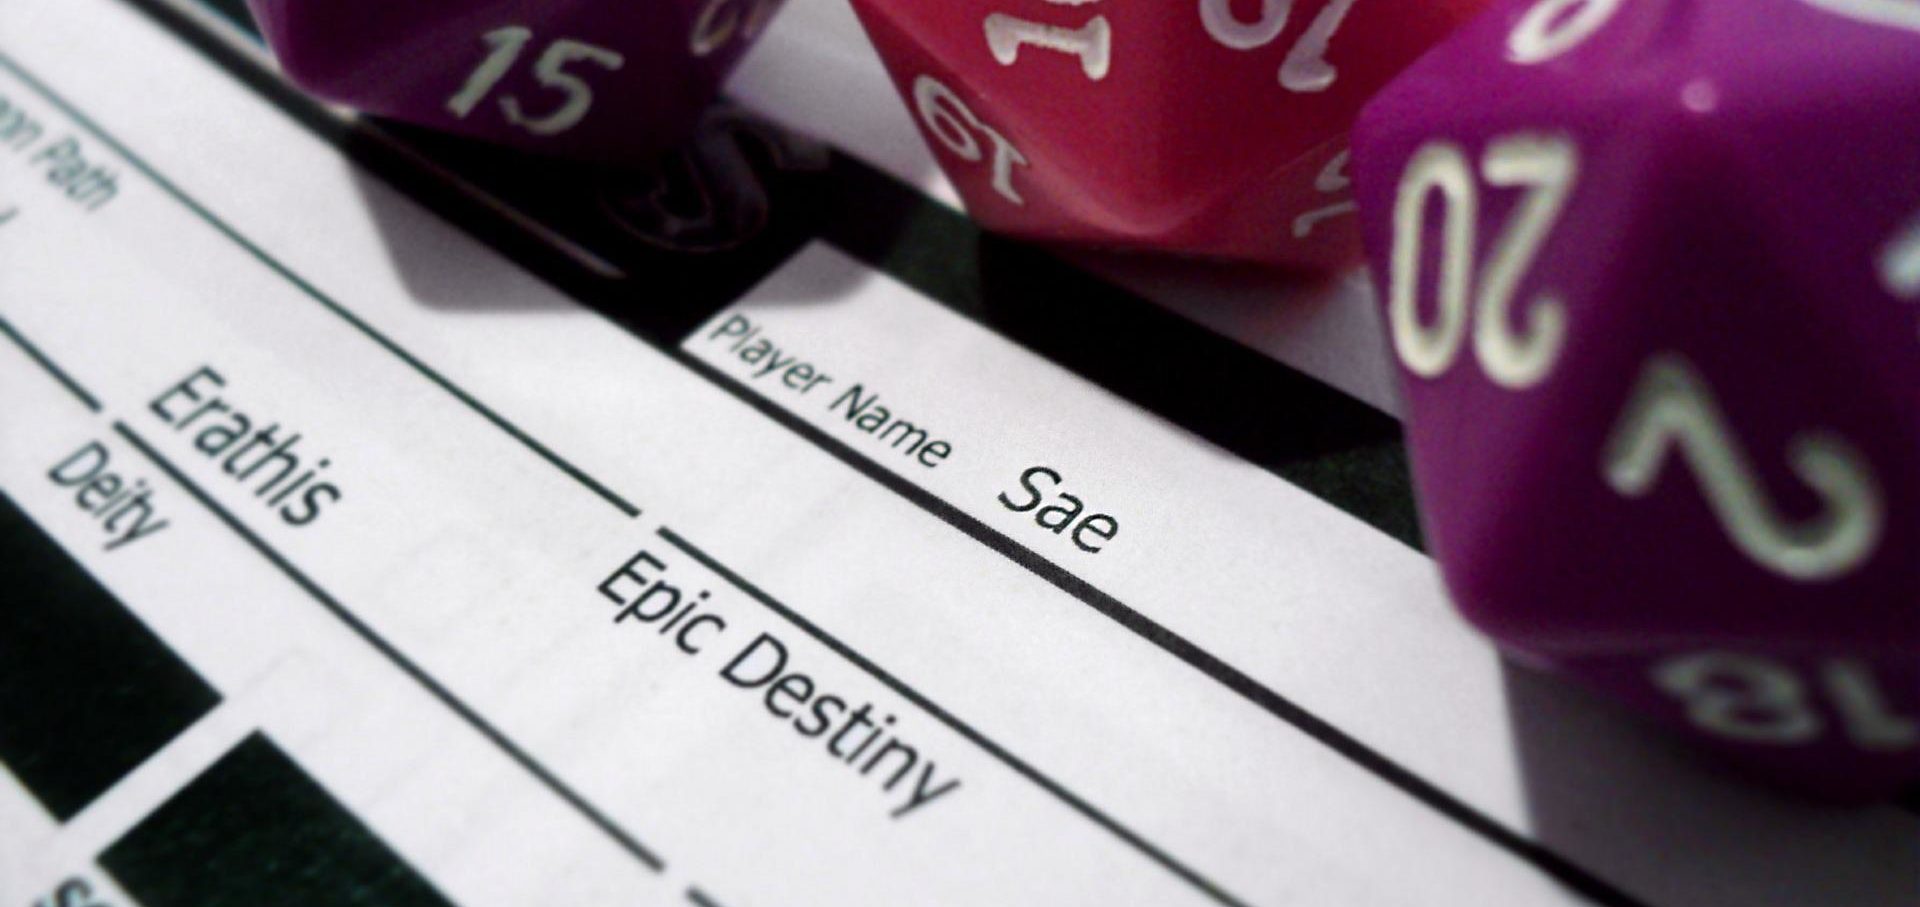 DnD Dice and Character Sheet image for post titled 6 Dungeons & Dragons Tips for New Players by Cult Adventures.